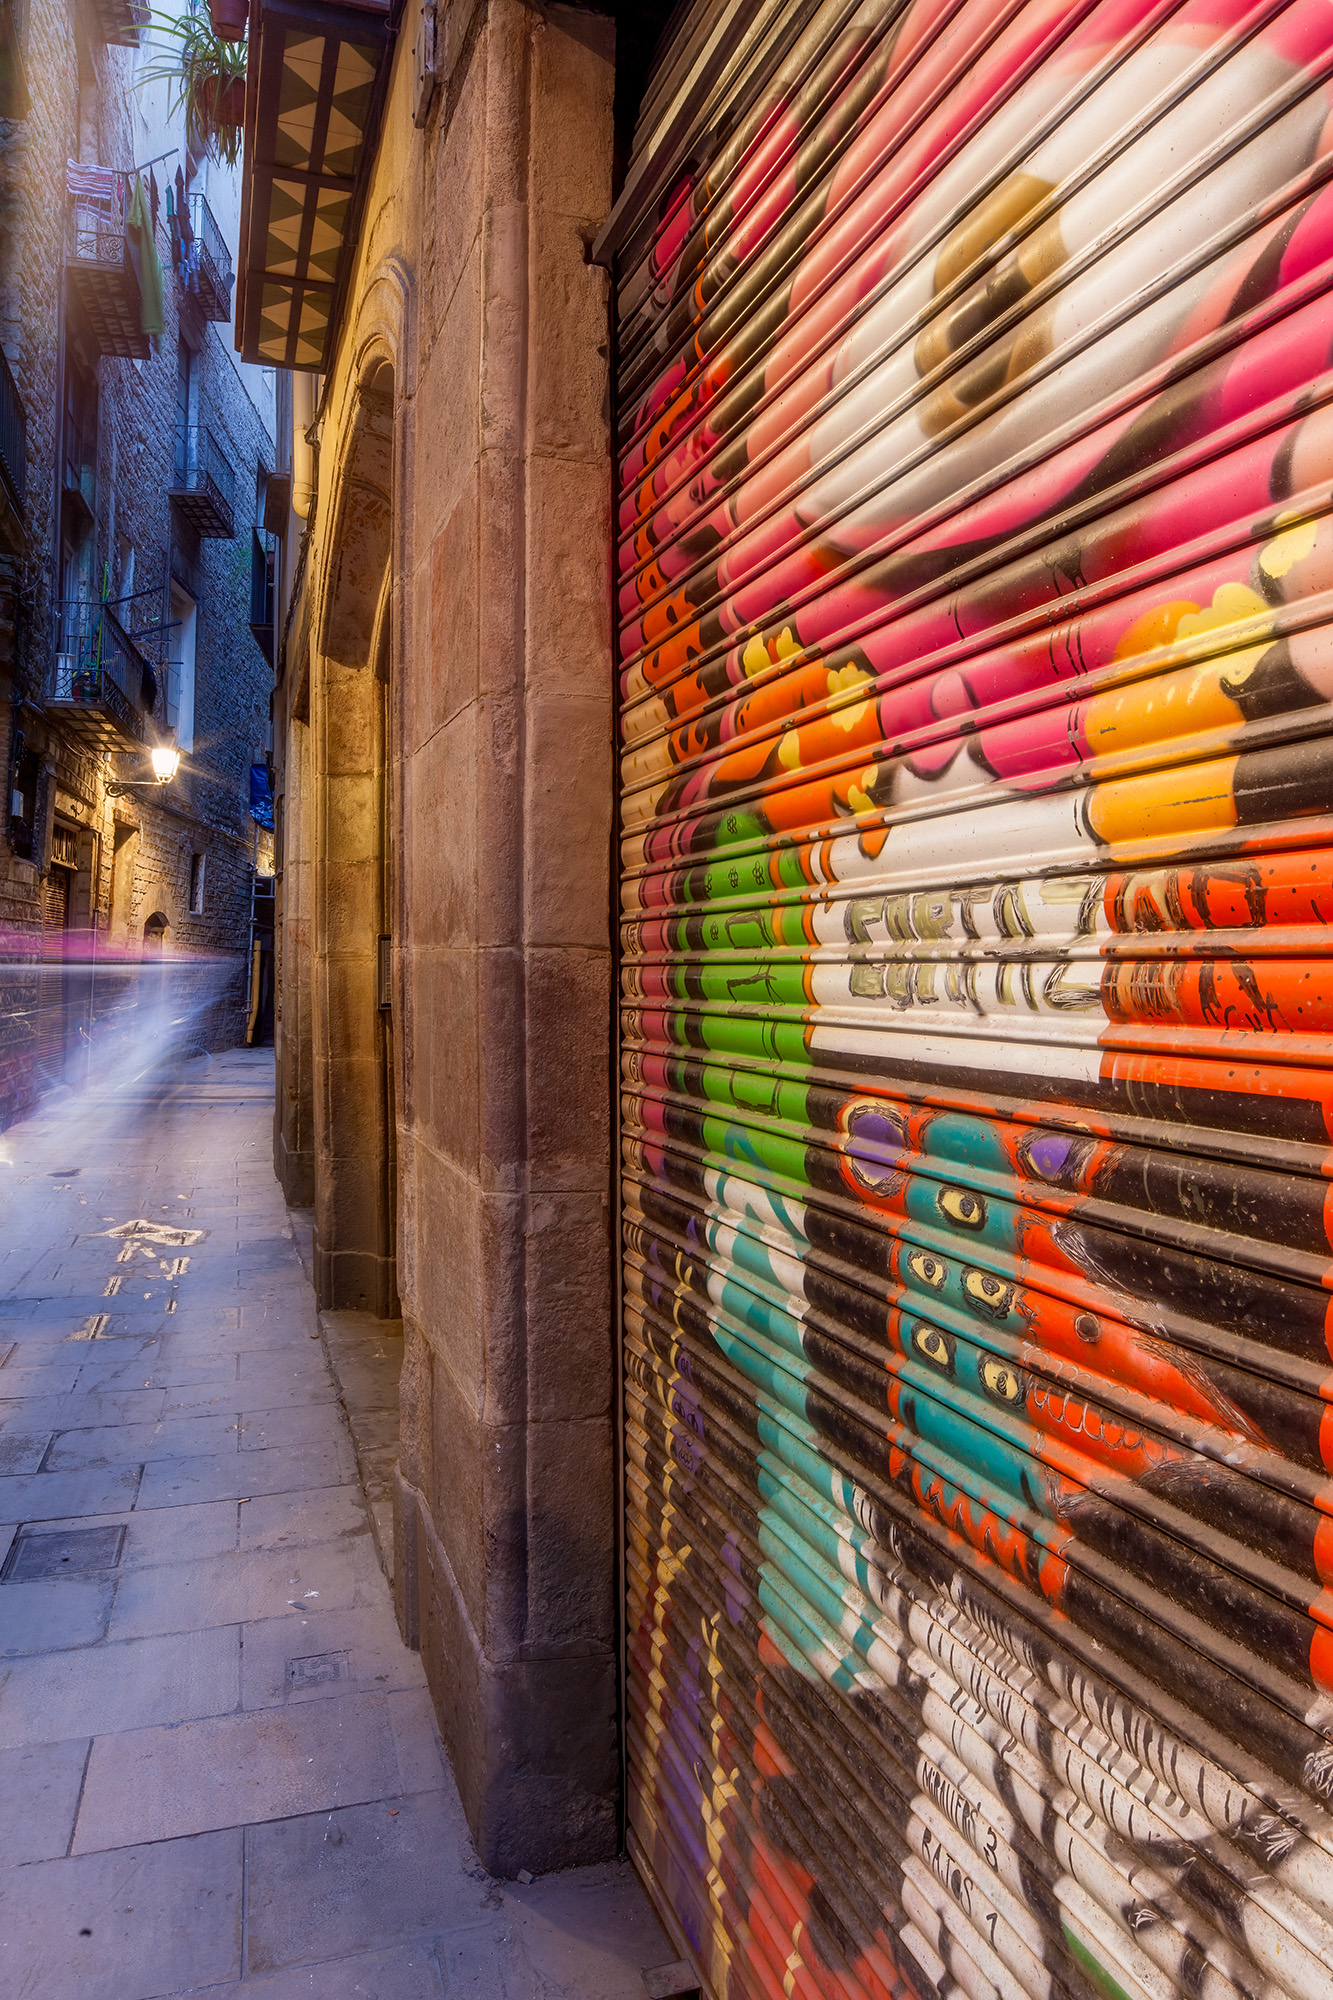 In Barcelona, Spain, beneath the veil of night, I peered down an alleyway that revealed a closed storefront. Its door, painted...